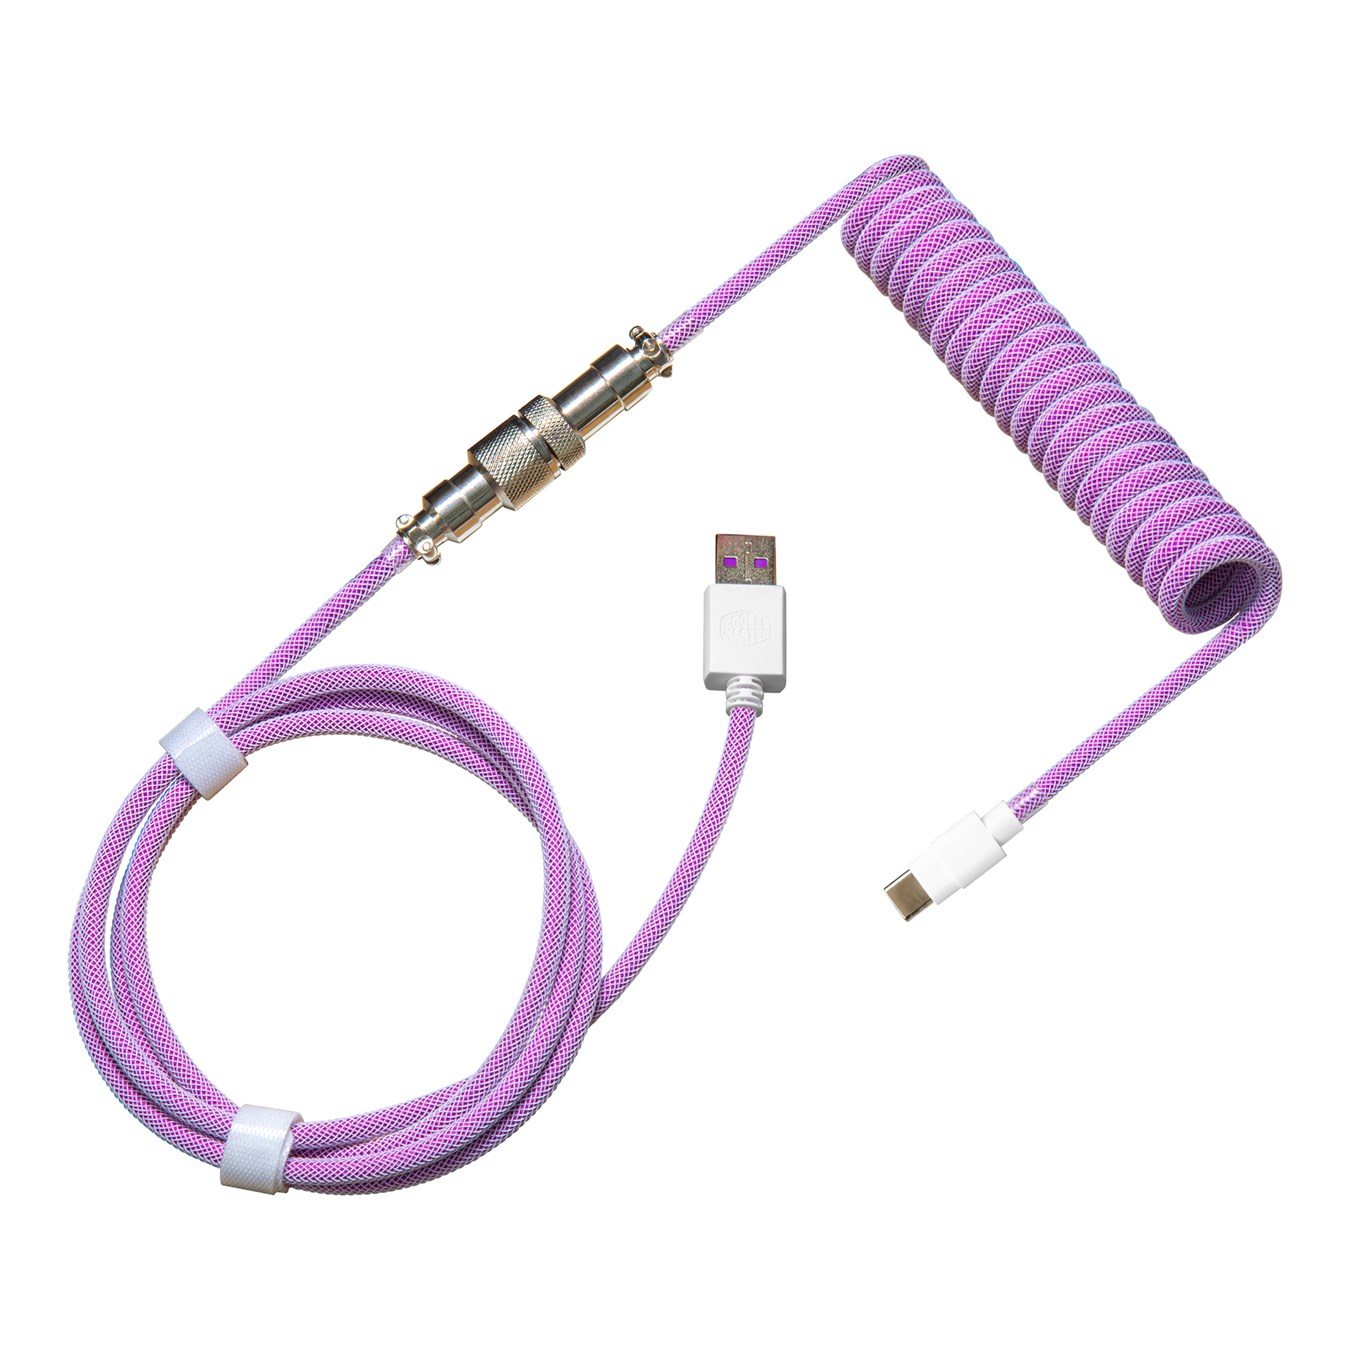 Coiled Keyboard Cable - Purple - USB Type-A to USB Type-C connector